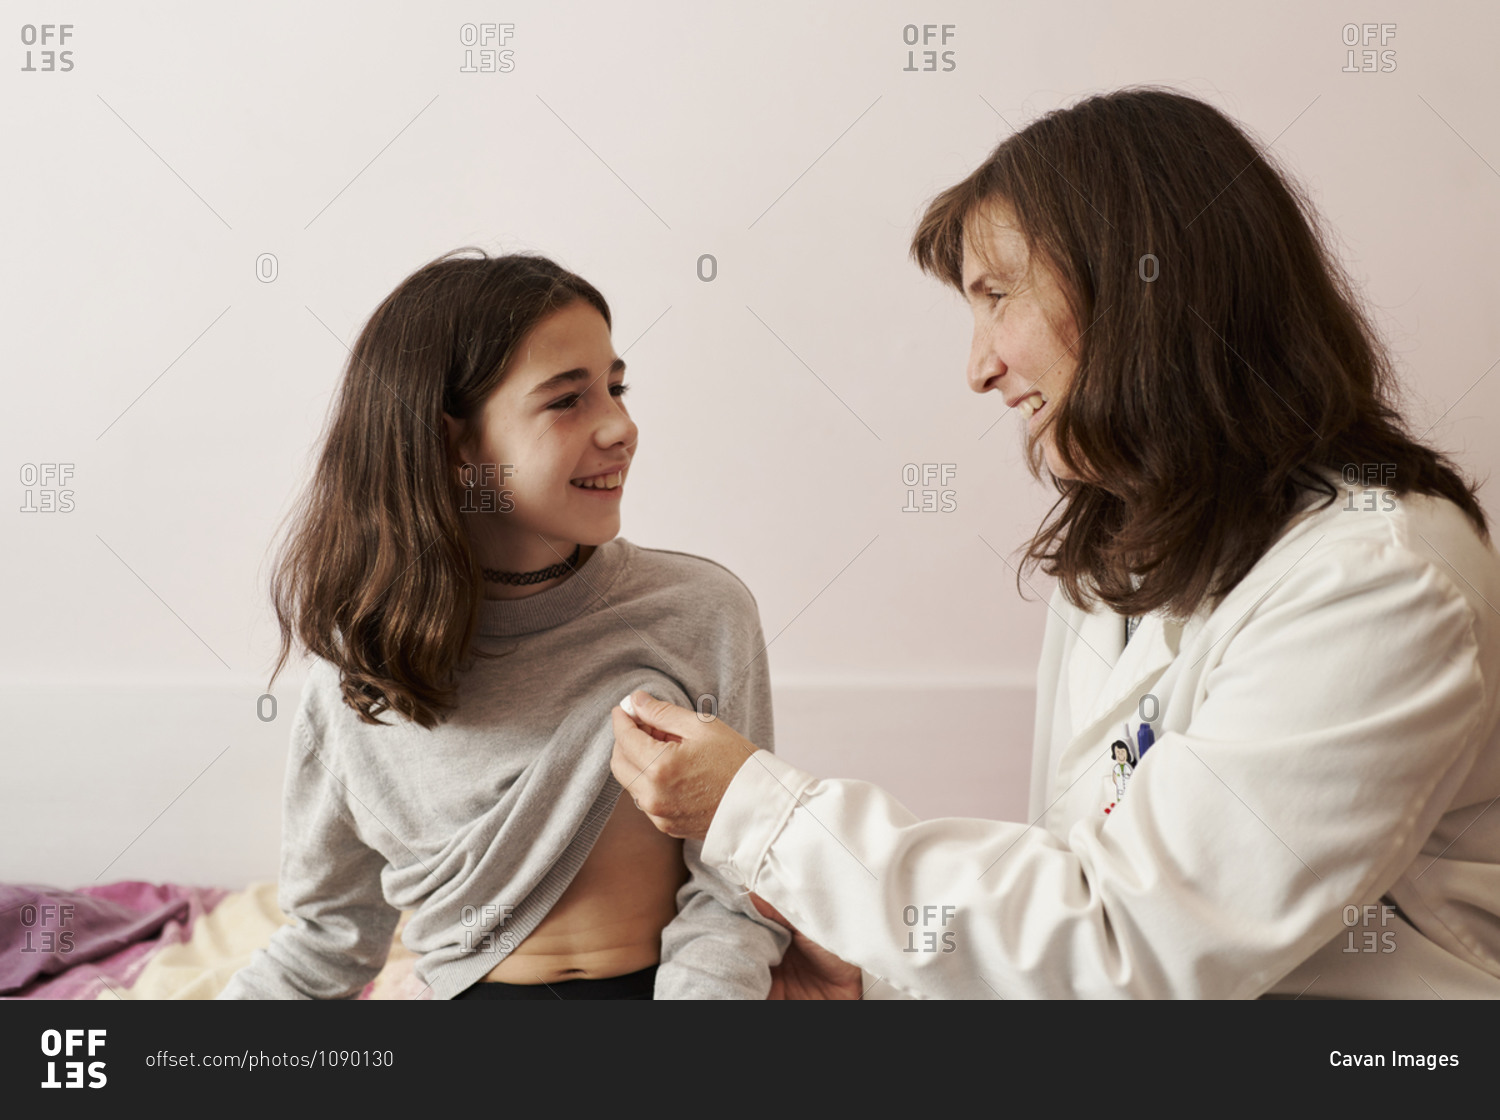 Female doctor teaching the temperature on a thermometer to a girl in her bed. Home doctor concept